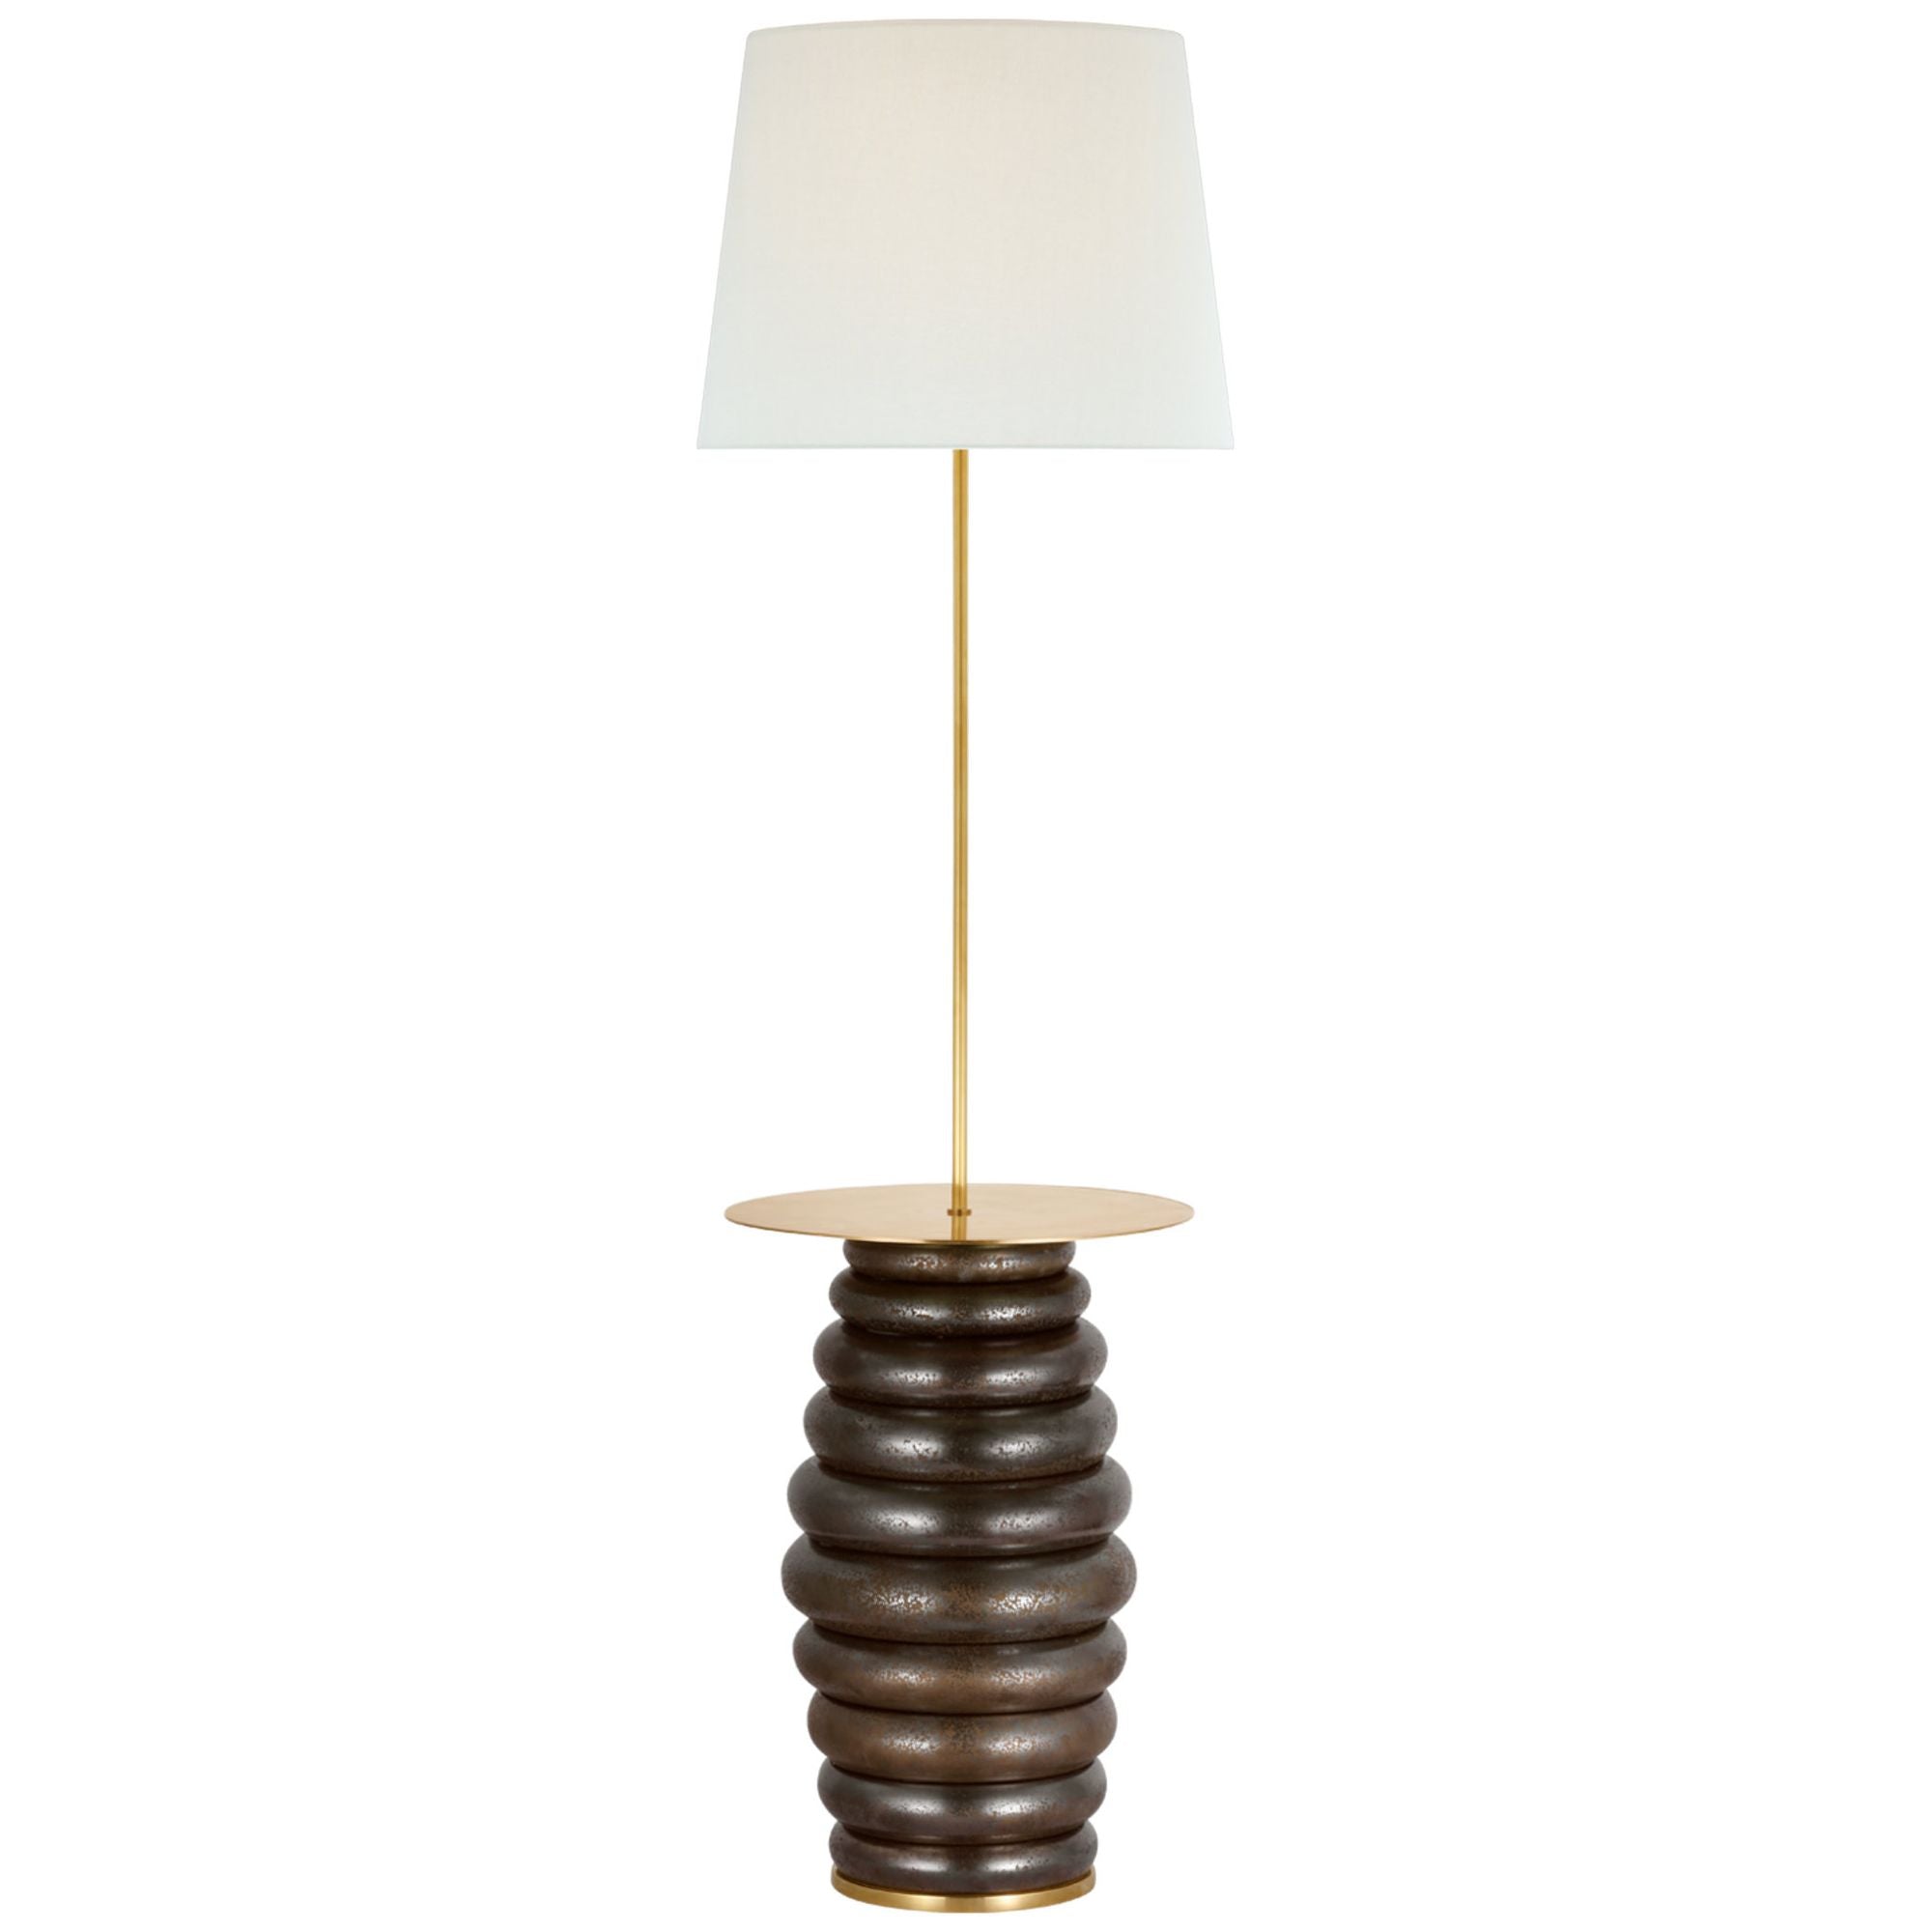 Kelly Wearstler Phoebe Extra Large Tray Table Floor Lamp in Crystal Bronze with Linen Shade